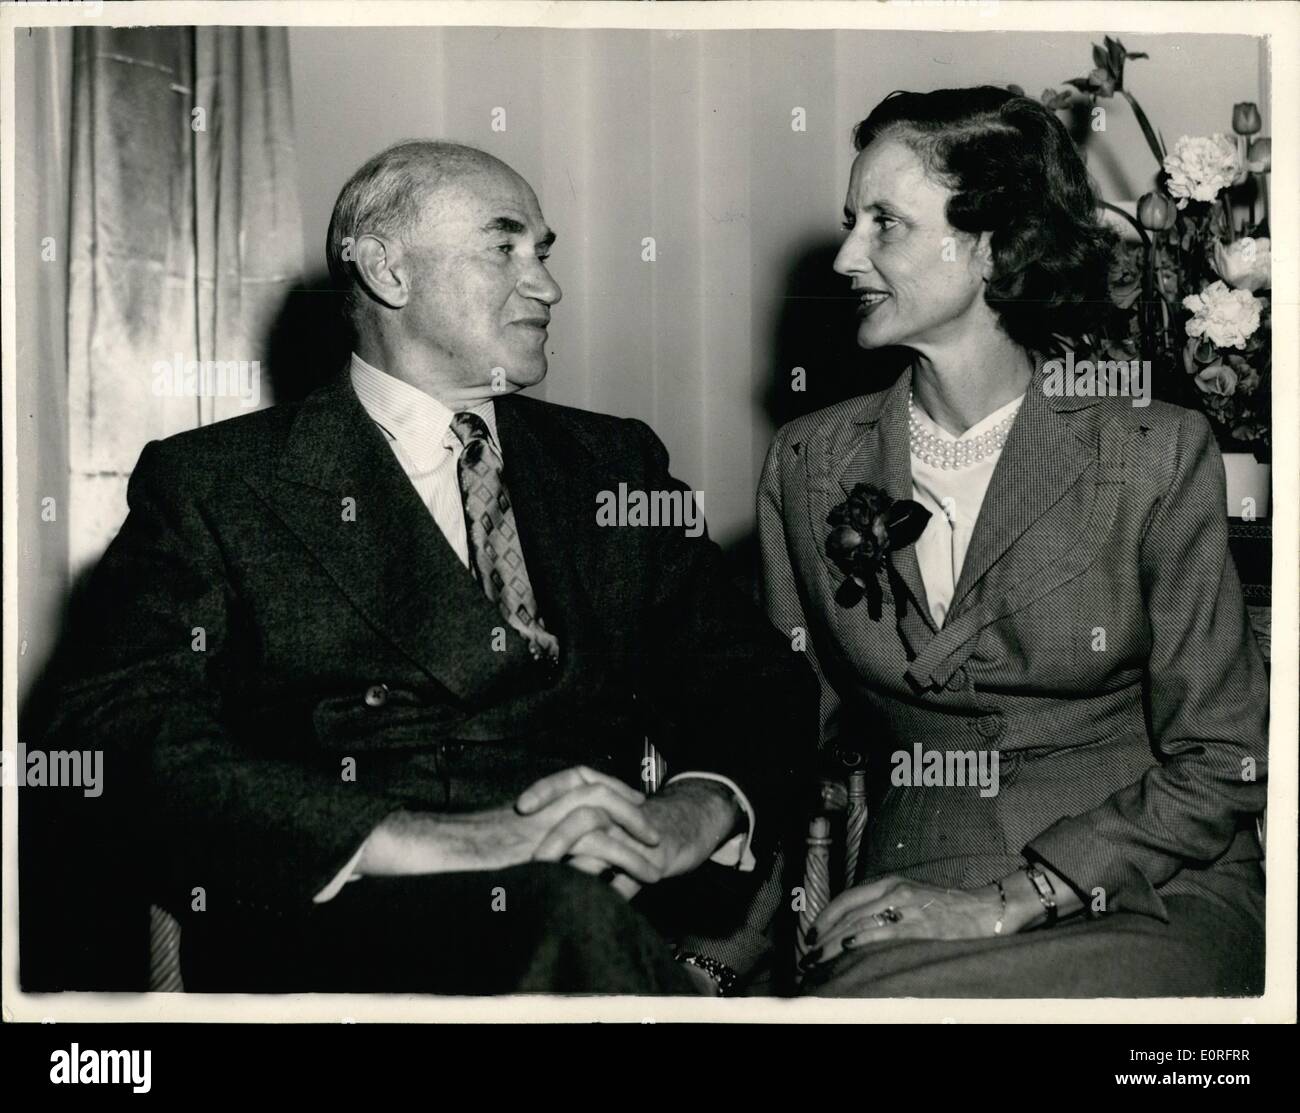 May 05, 1959 - Sam Goldwyn Holds A Press Reception... 28-4-53 He Faces The Cameras: Sam Goldwyn the American film producer who is now 70 years of age - arrived in London today and held a press reception at Claridges Hotel this afternoon. He was accompanied by his wife, Francois.. Photo shows Sam Goldwyn - for a change-faces the cameras himself -during the press conference this afternoon.05 Stock Photo